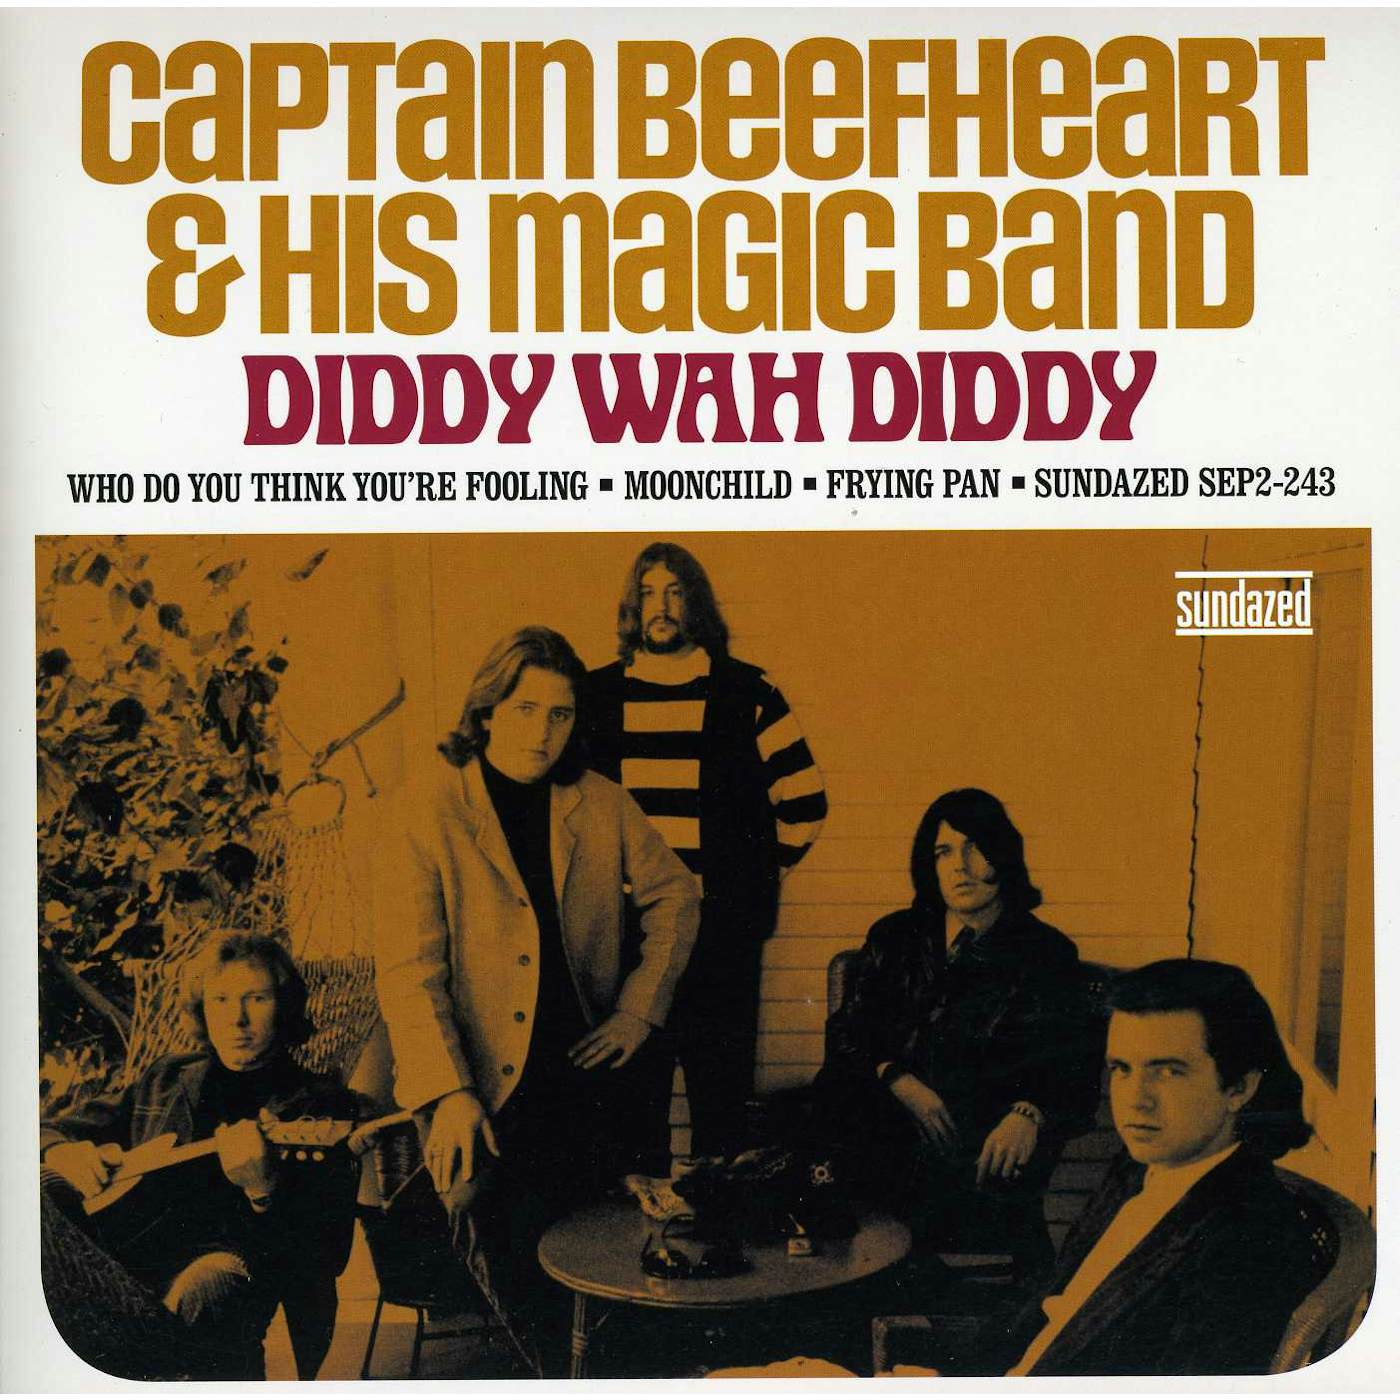 Captain Beefheart & His Magic Band DIDDY WAH DIDDY / WHO DO YOU THINK YOU ARE FOOLING Vinyl Record